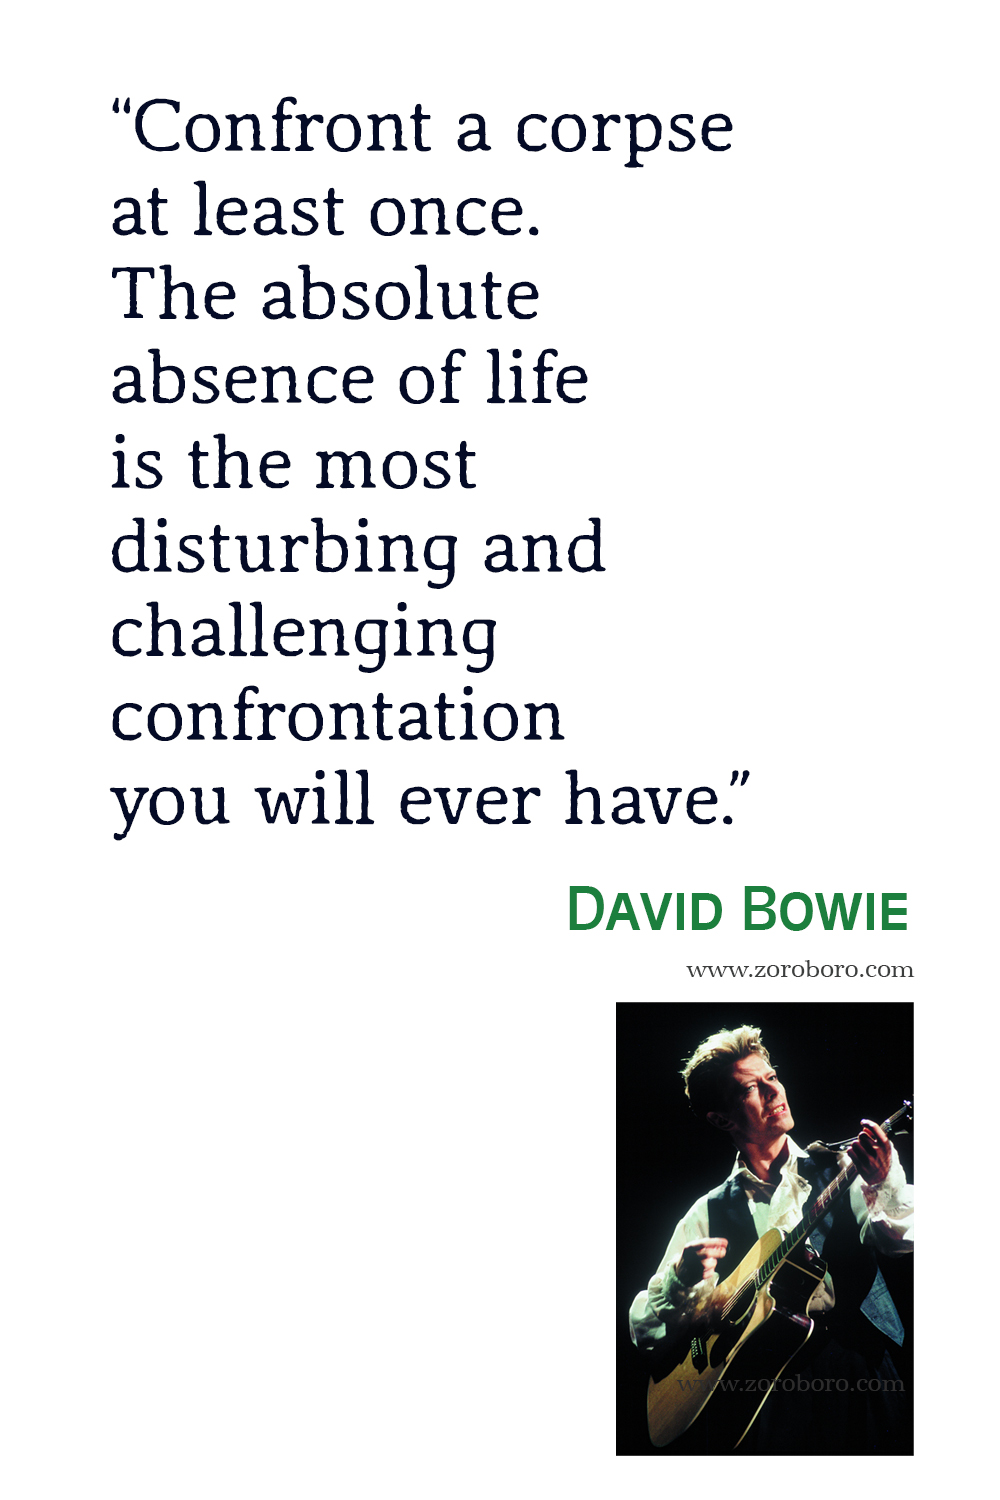 David Bowie Quotes, David Bowie Songs Quotes, David Bowie Lyrics Quotes, David Bowie Posters, David Bowie The Songs Of David Bowie, Quicksand, Lazarus, Station to Station, Moonage Daydream, All the Madmen, Fill Your Heart, The Man Who Sold the World Quotes, Heroes.